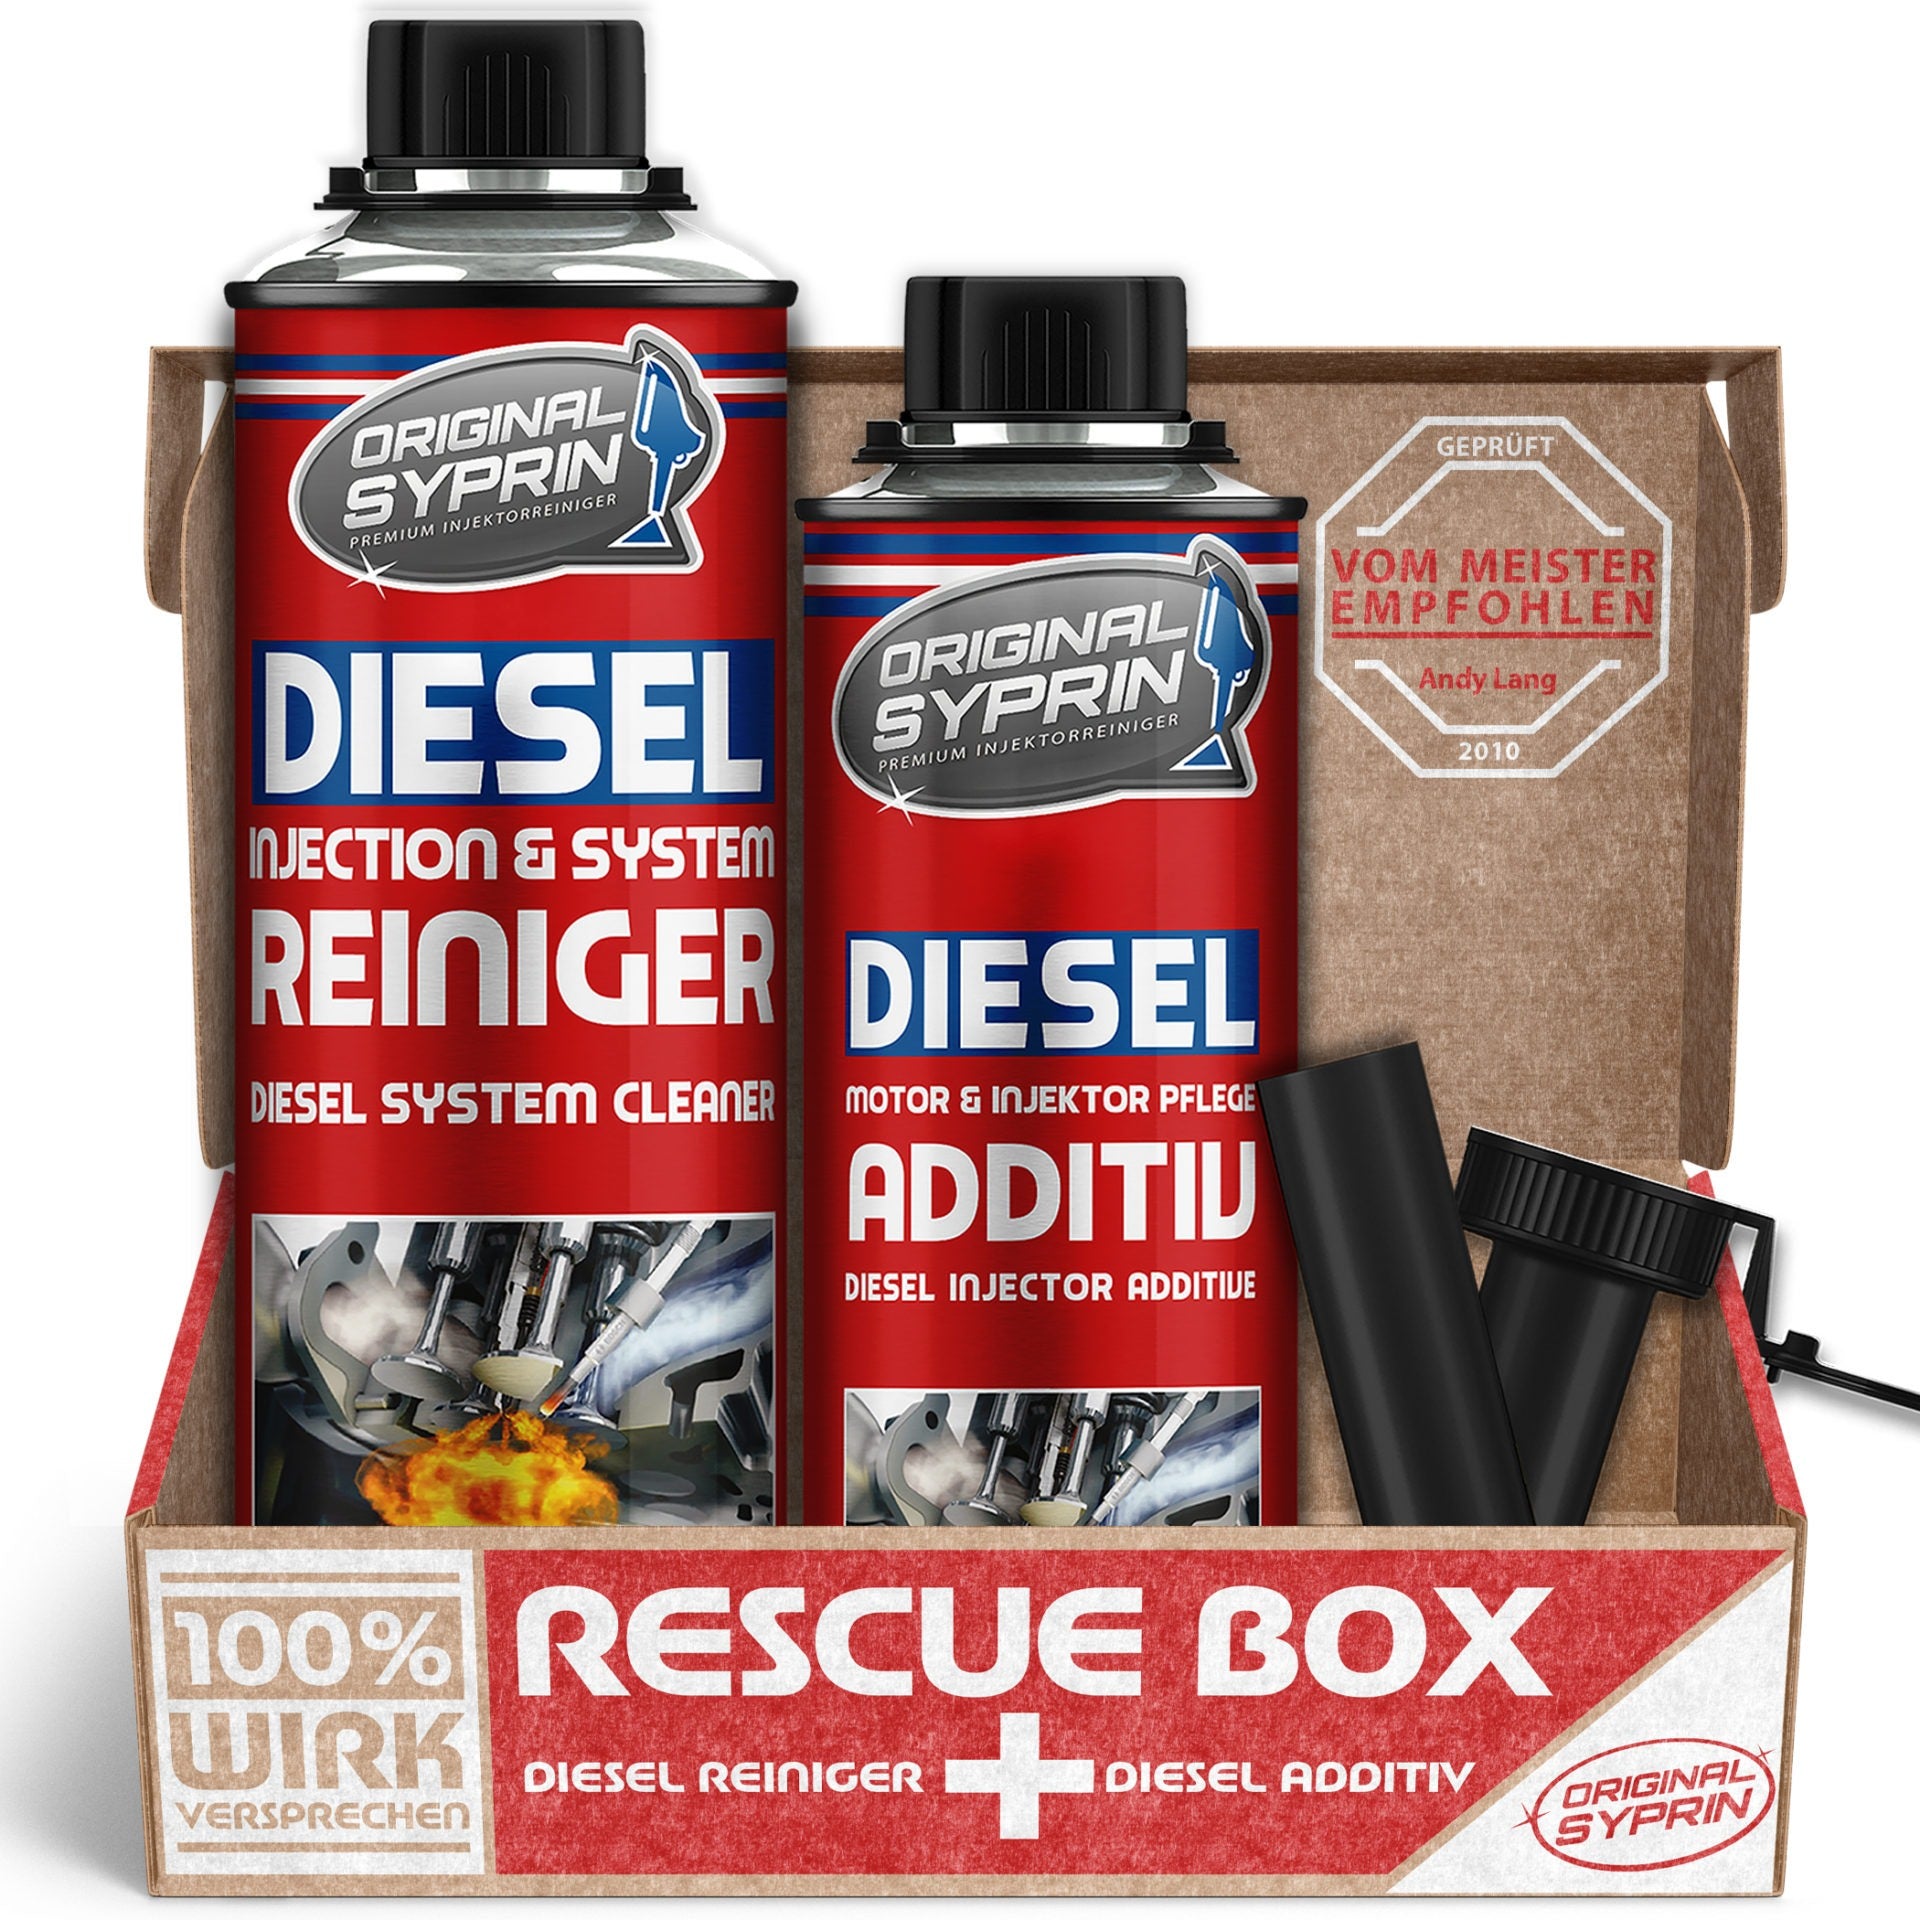 ORIGINAL SYPRIN Diesel Rescue Box - Diesel Cleaner and Additive (500ml